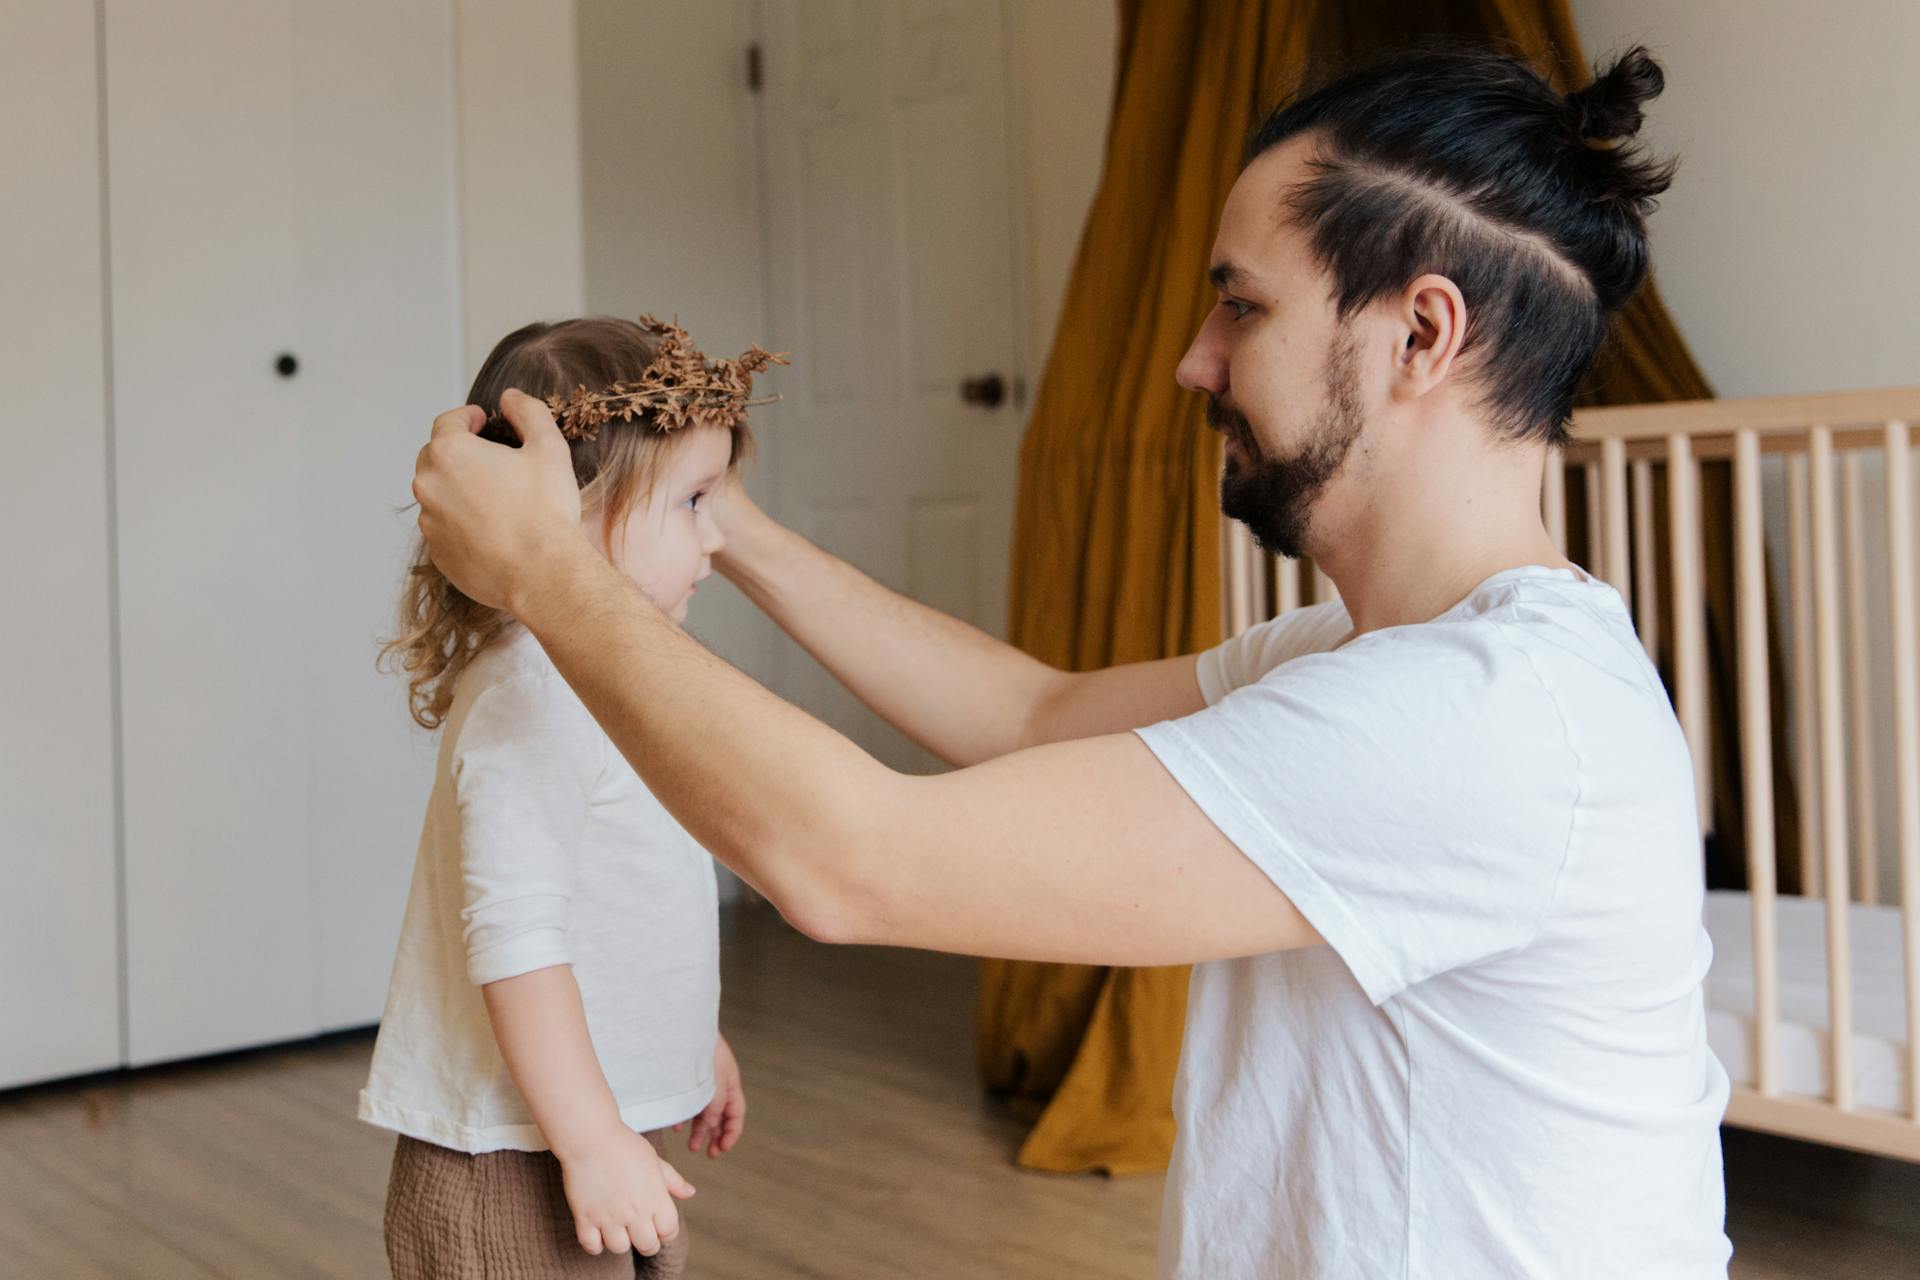 A man putting a flower crown on his daughter's head | Source: Pexels